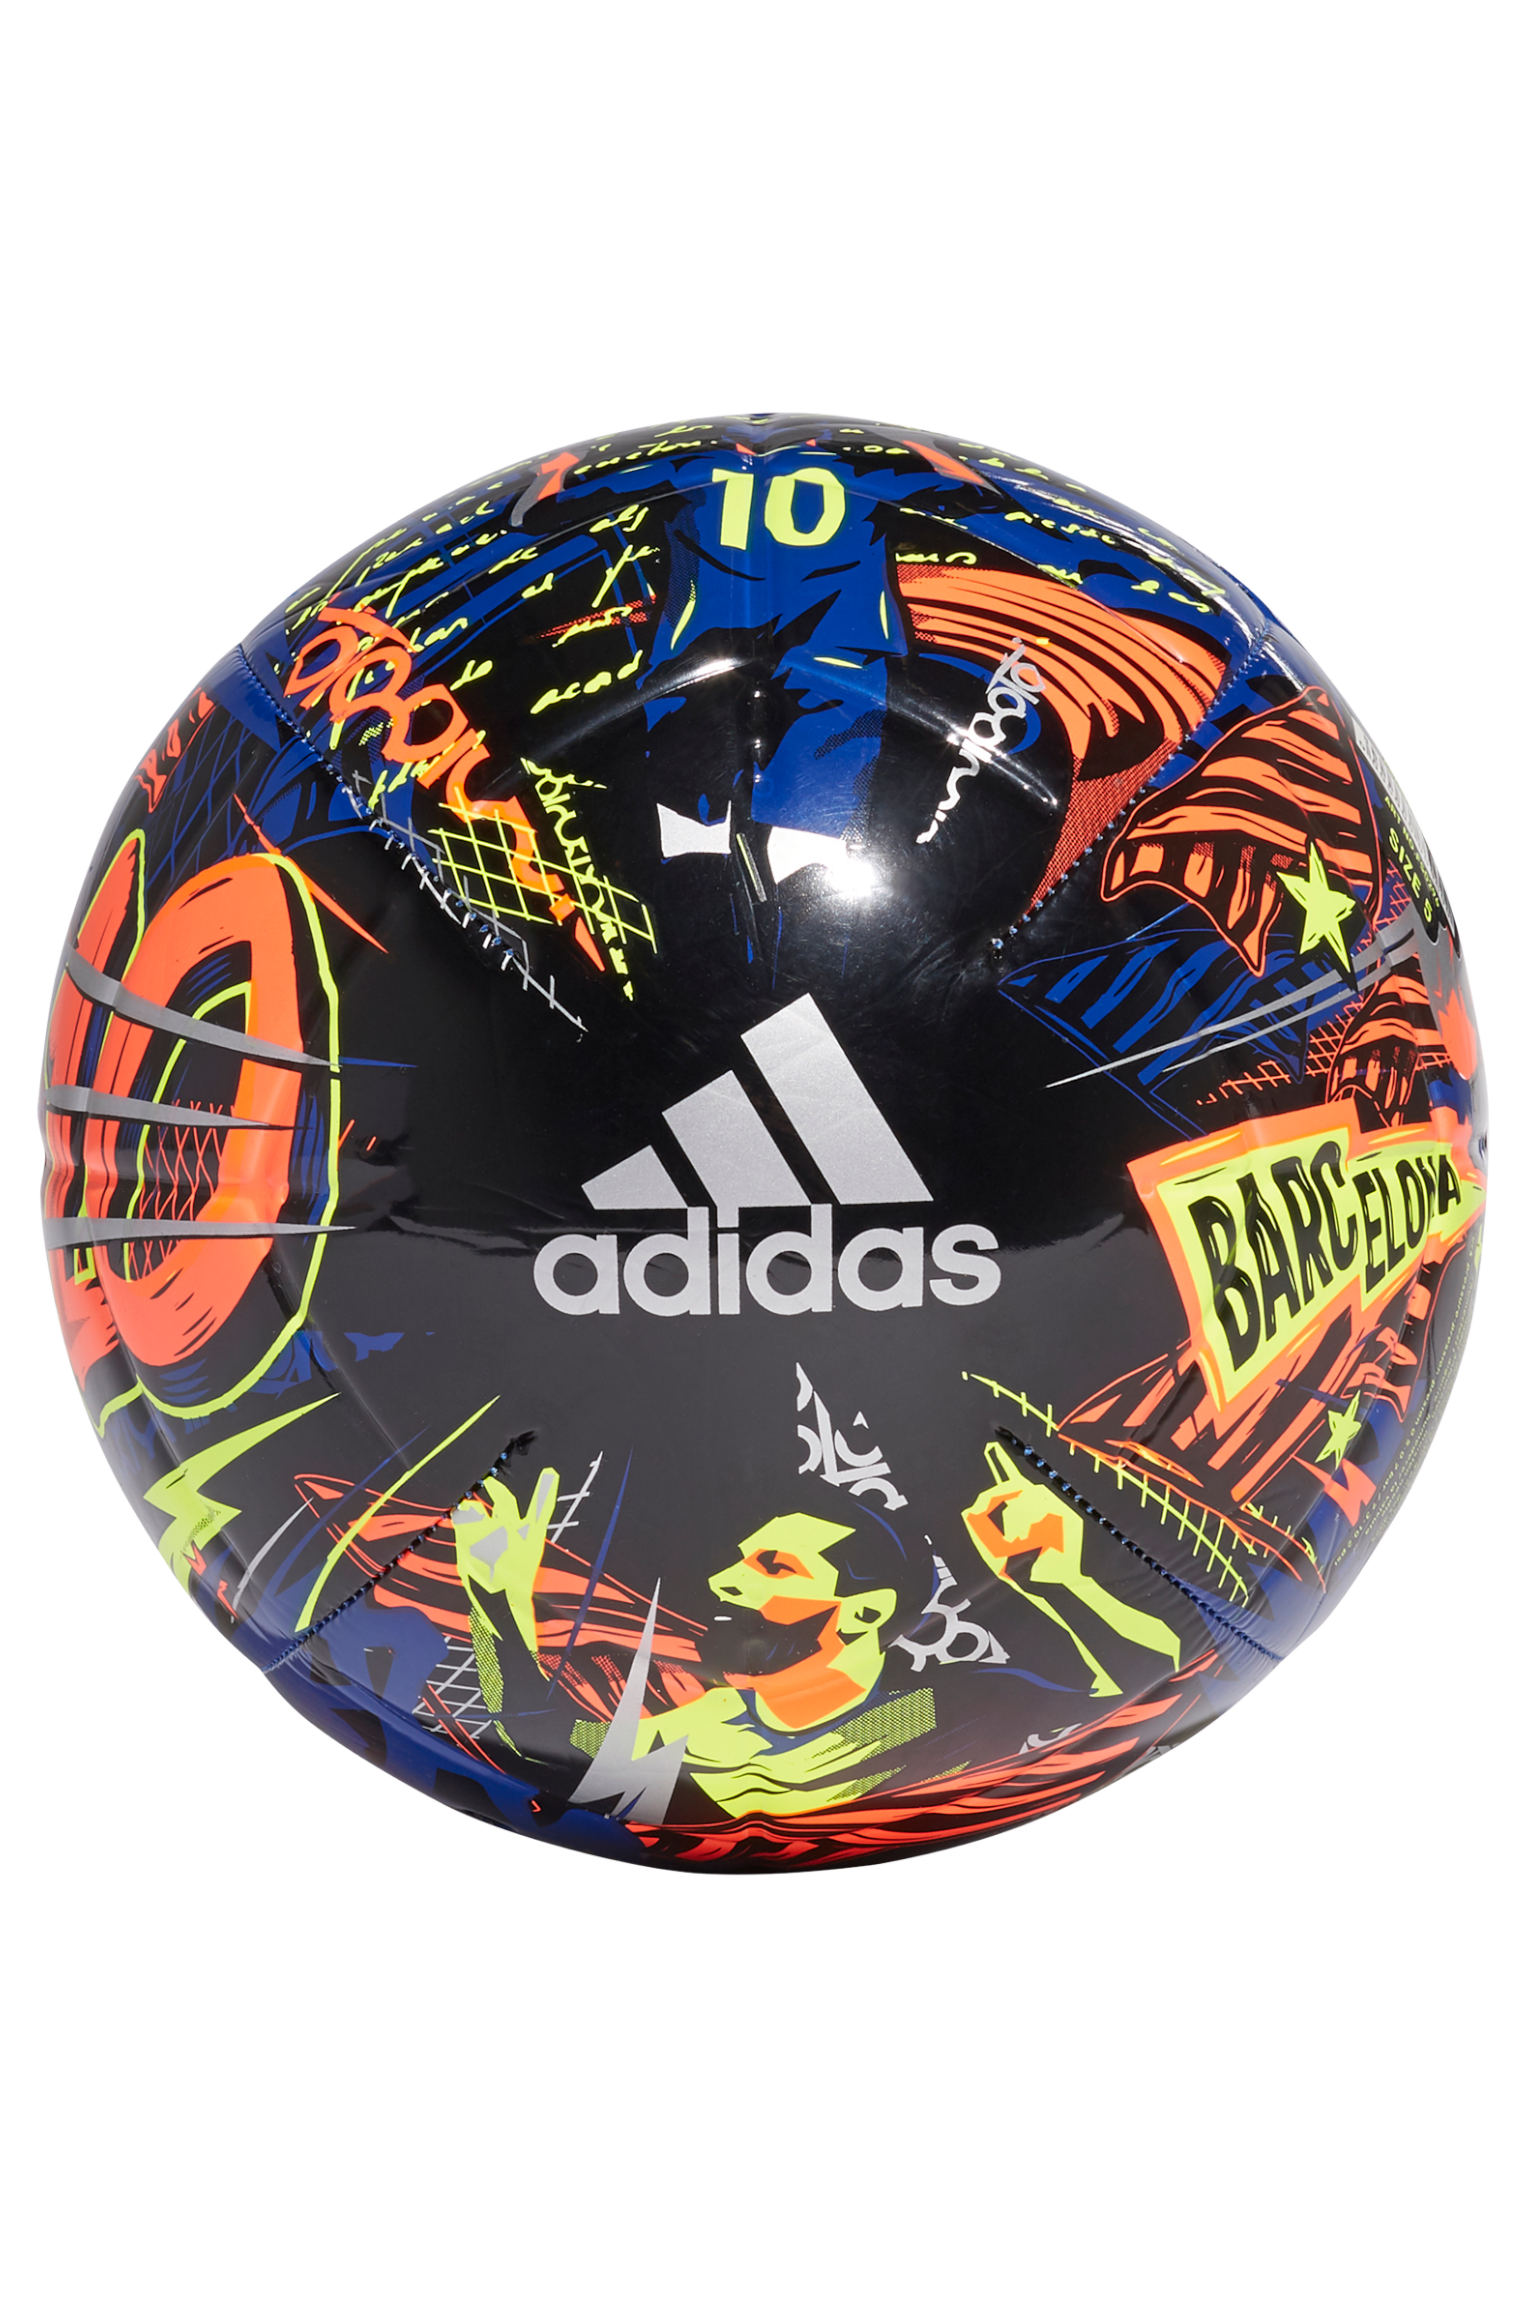 messi size 4 soccer ball